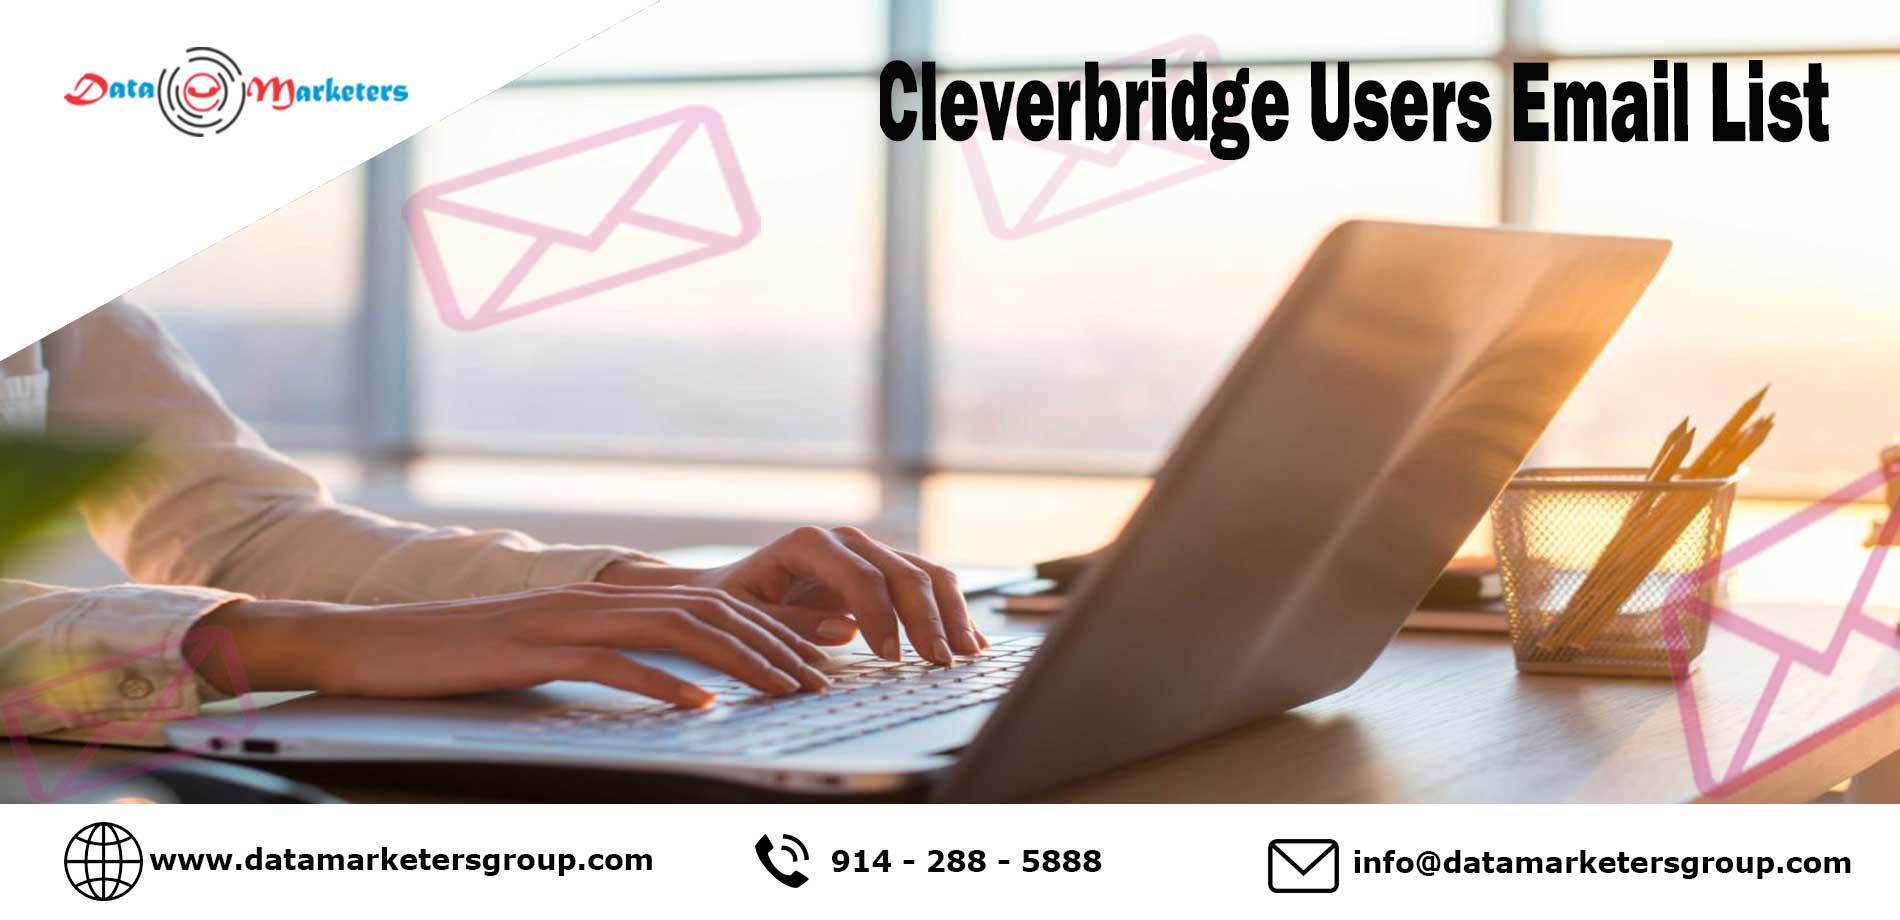 Cleverbridge Users Email List | What Companies Use Cleverbridge